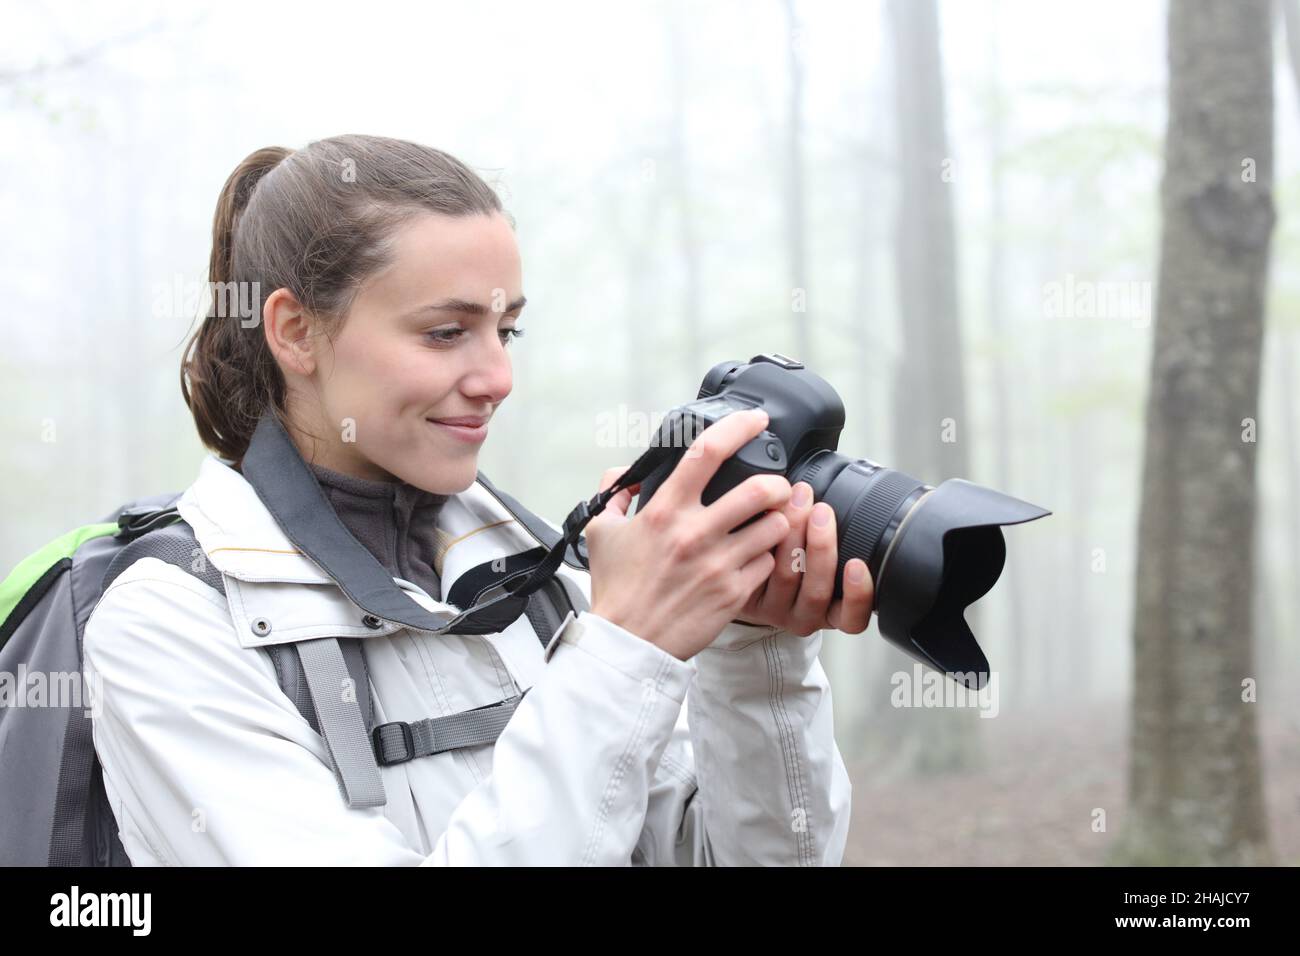 Hiker checking photos on dslr camera waking in a foggy forest Stock Photo